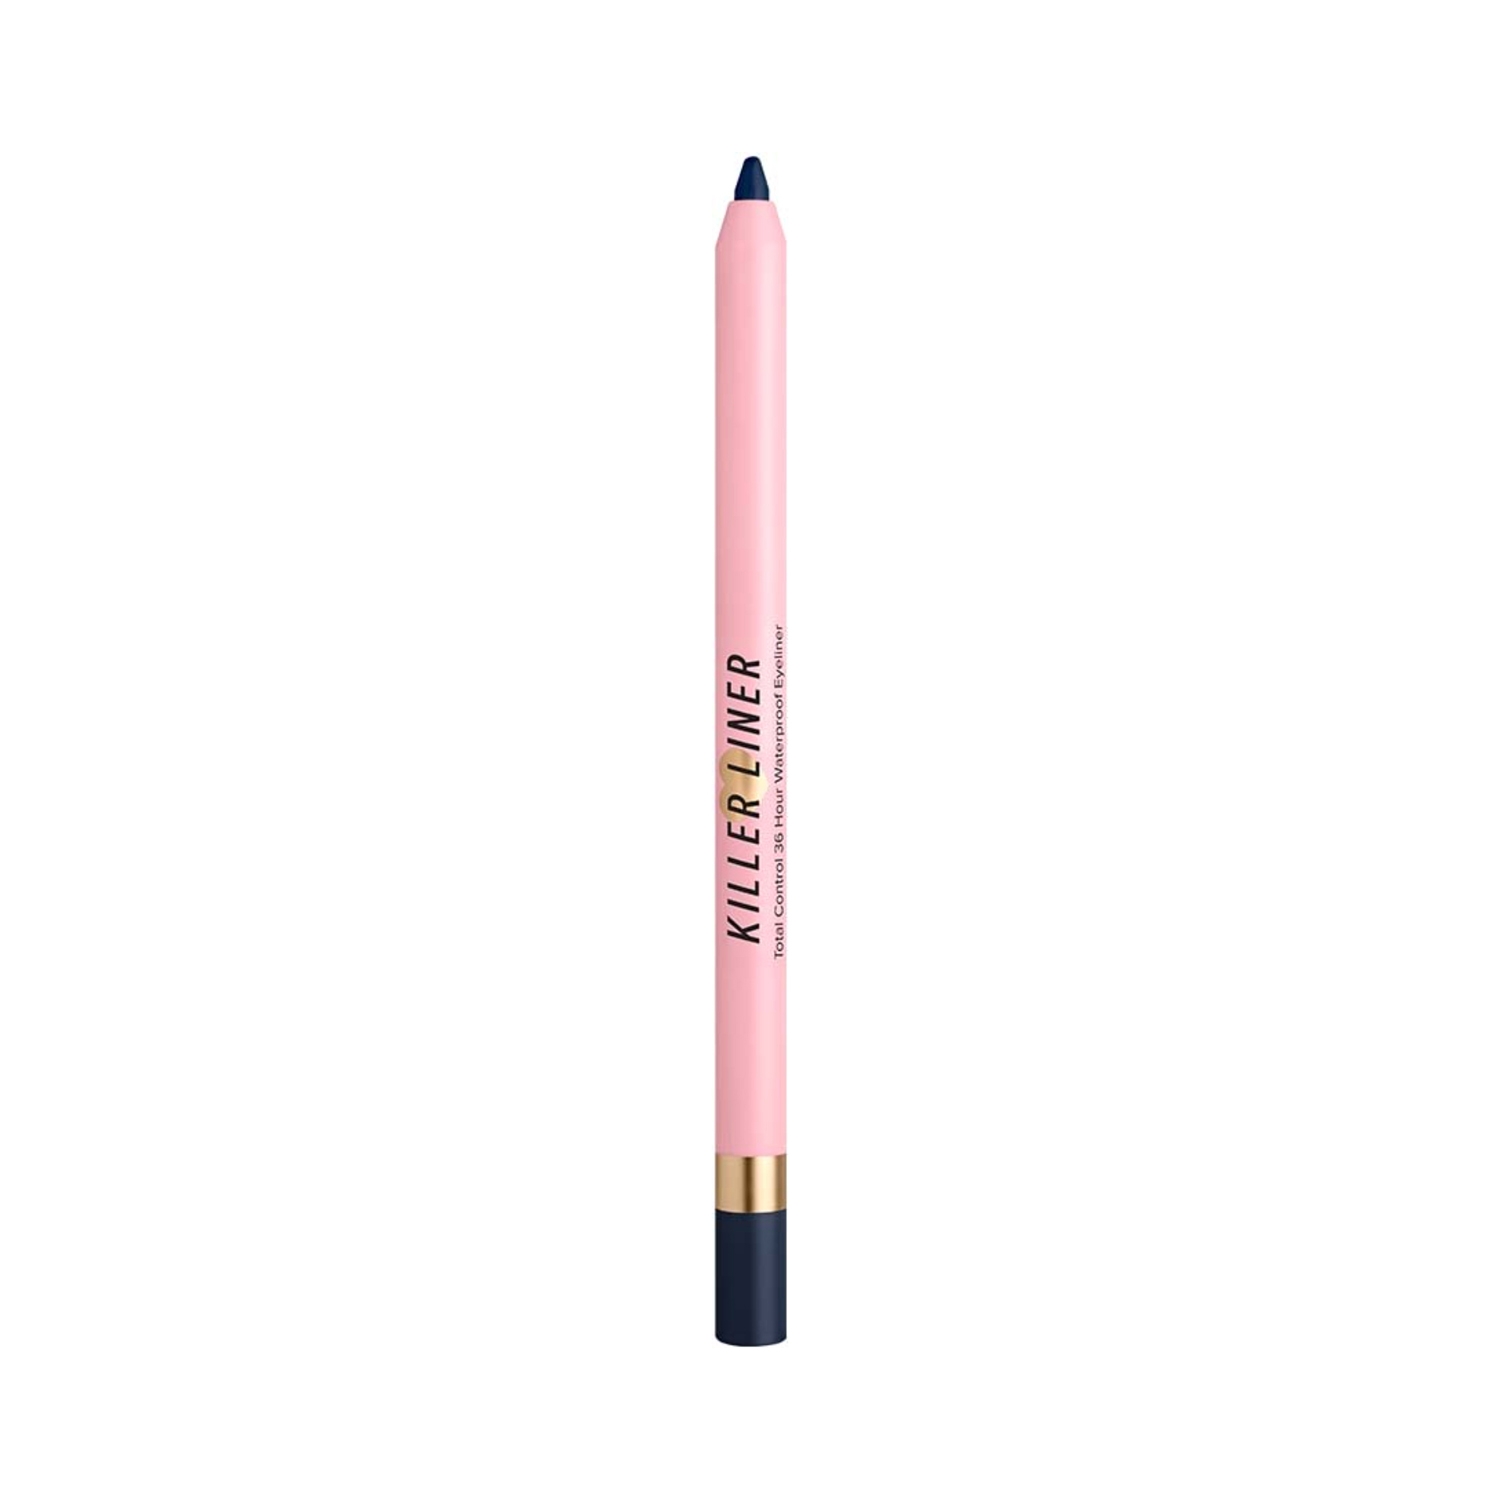 Too Faced | Too Faced Killer Eyeliner - Turquoise (1.2g)